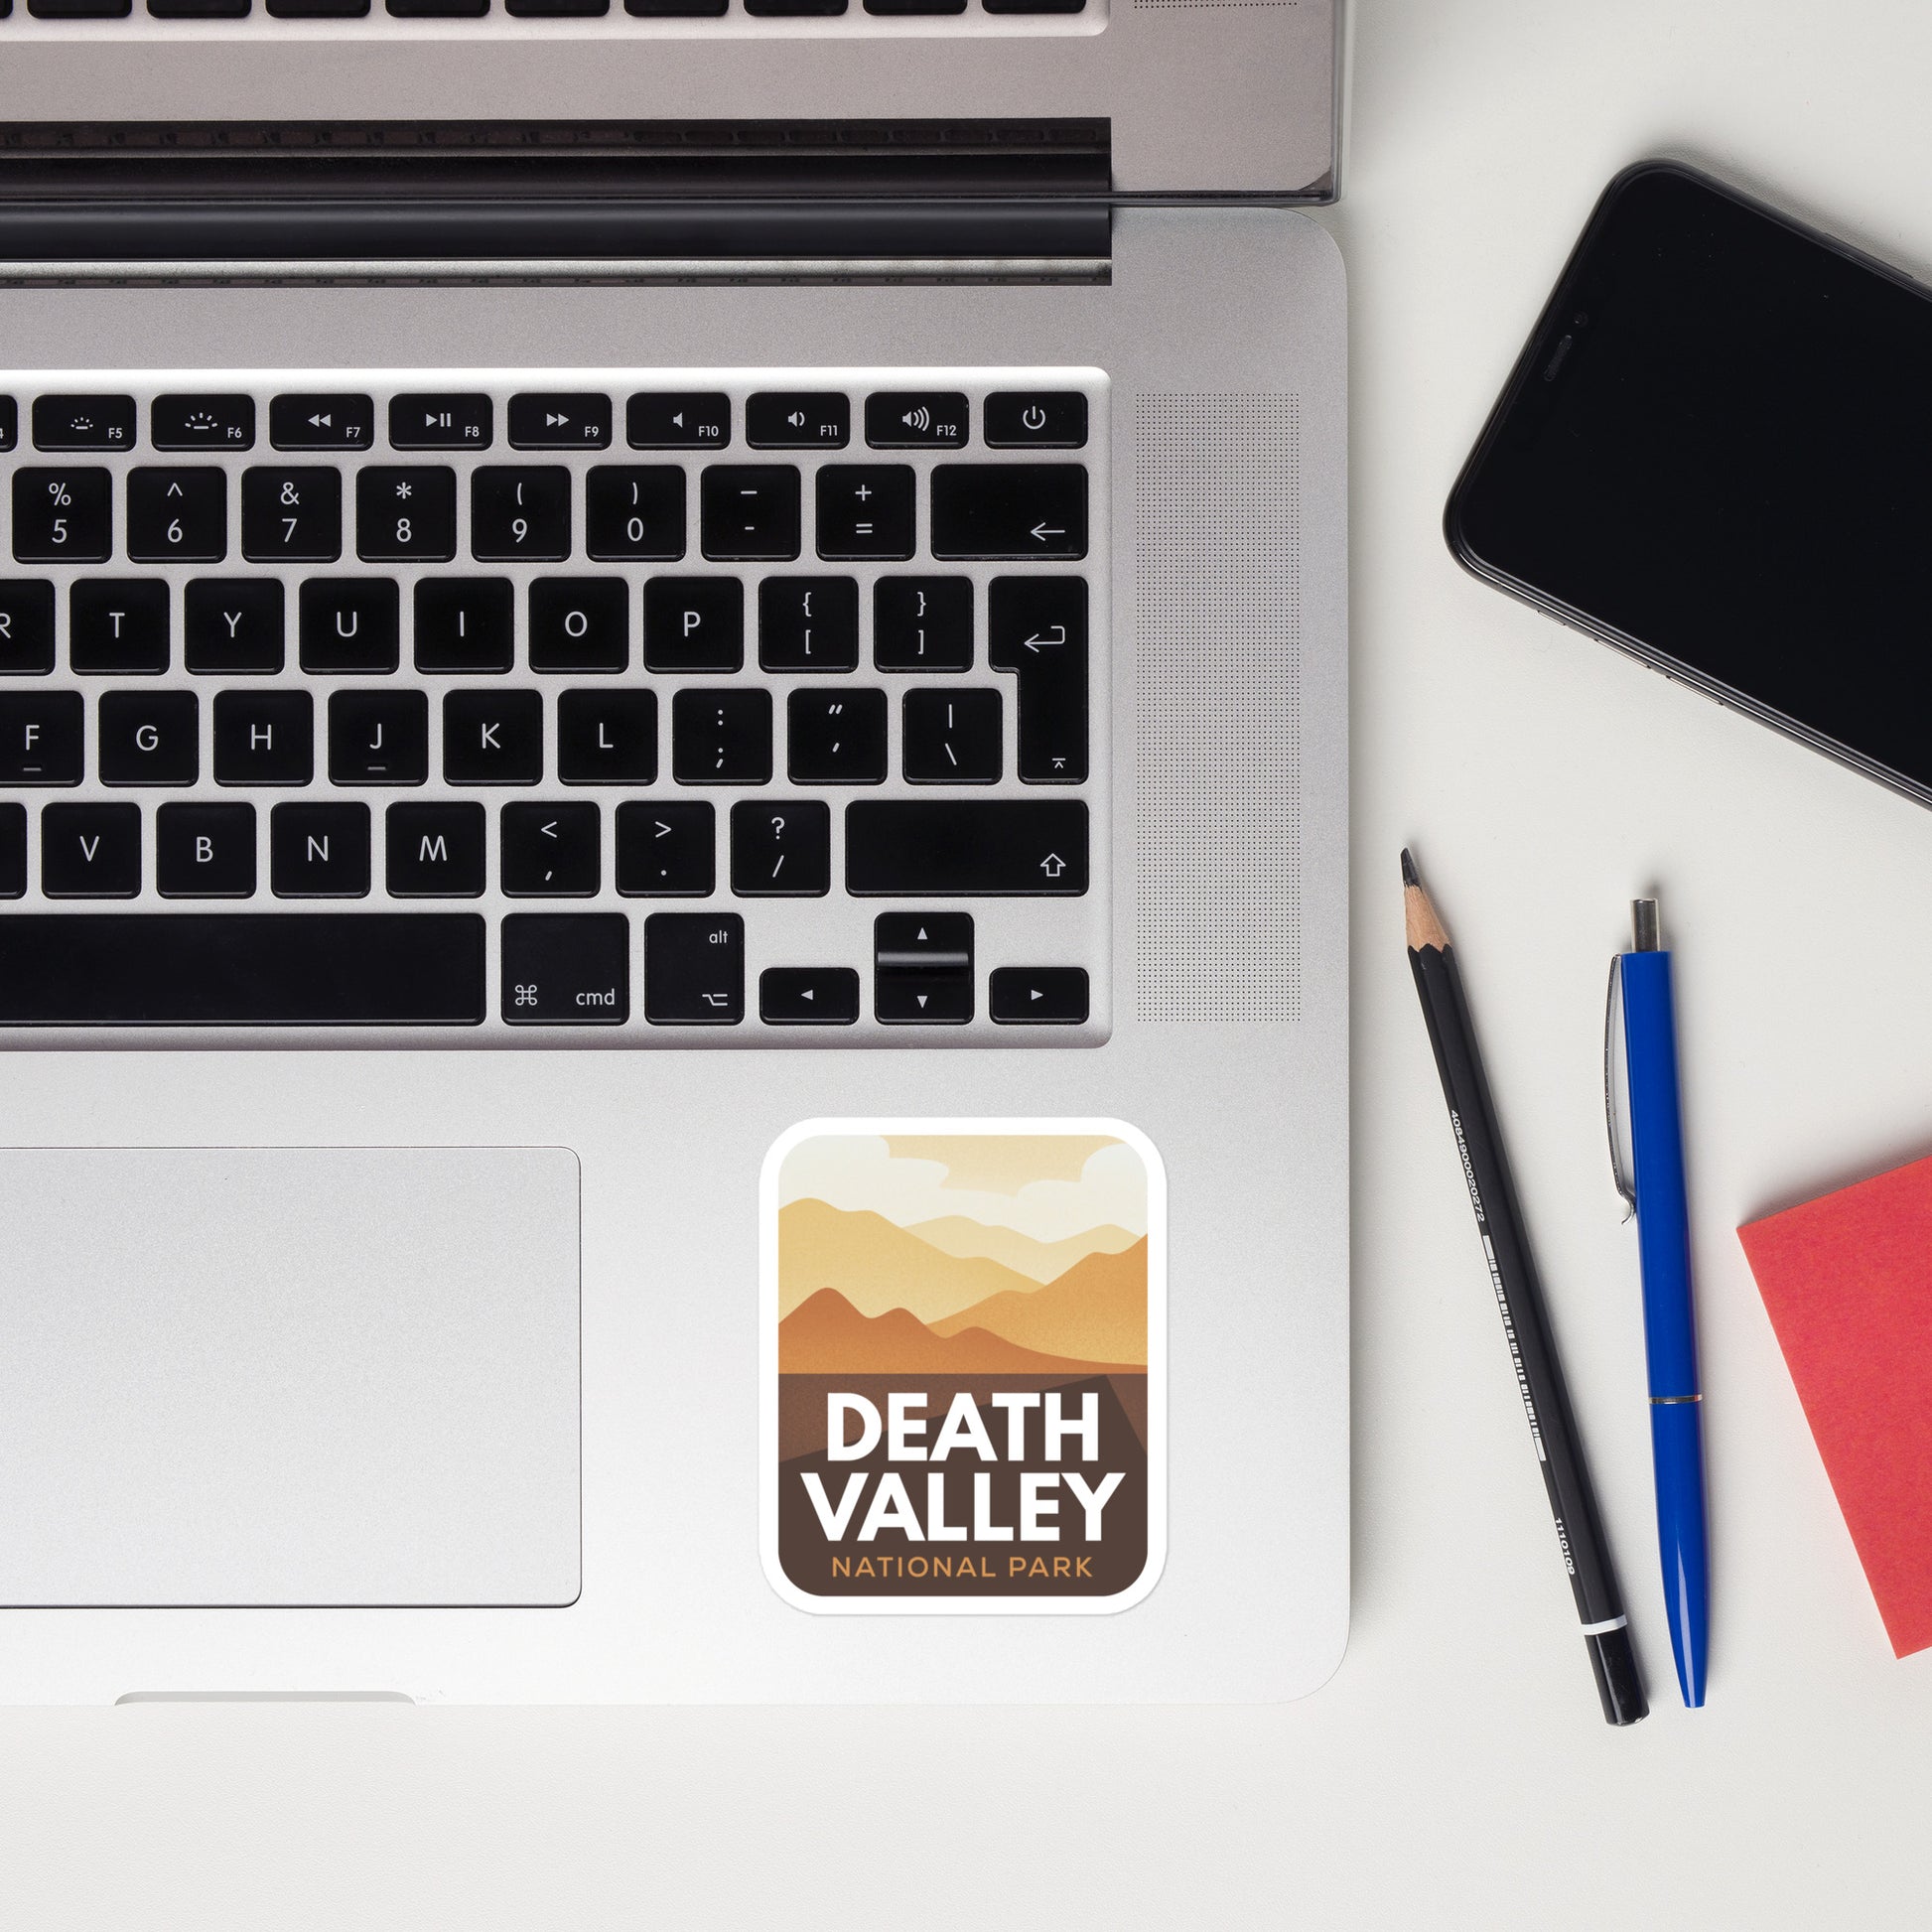 A sticker of Death Valley National Park on a laptop